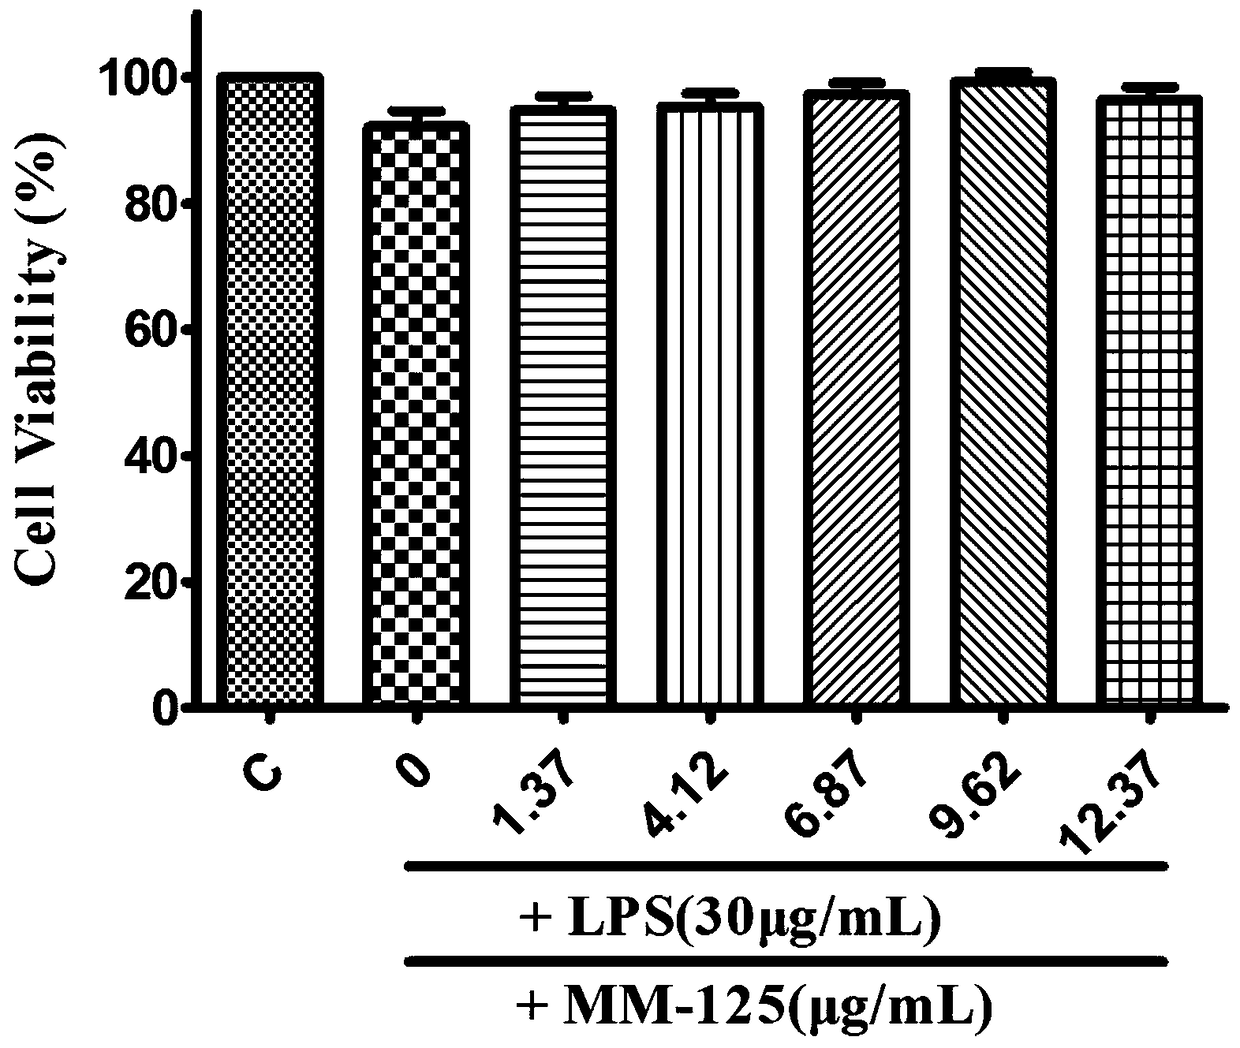 Application of a phenylpropanoid compound and a pharmaceutically acceptable salt thereof in the preparation of medicines for treating inflammatory diseases